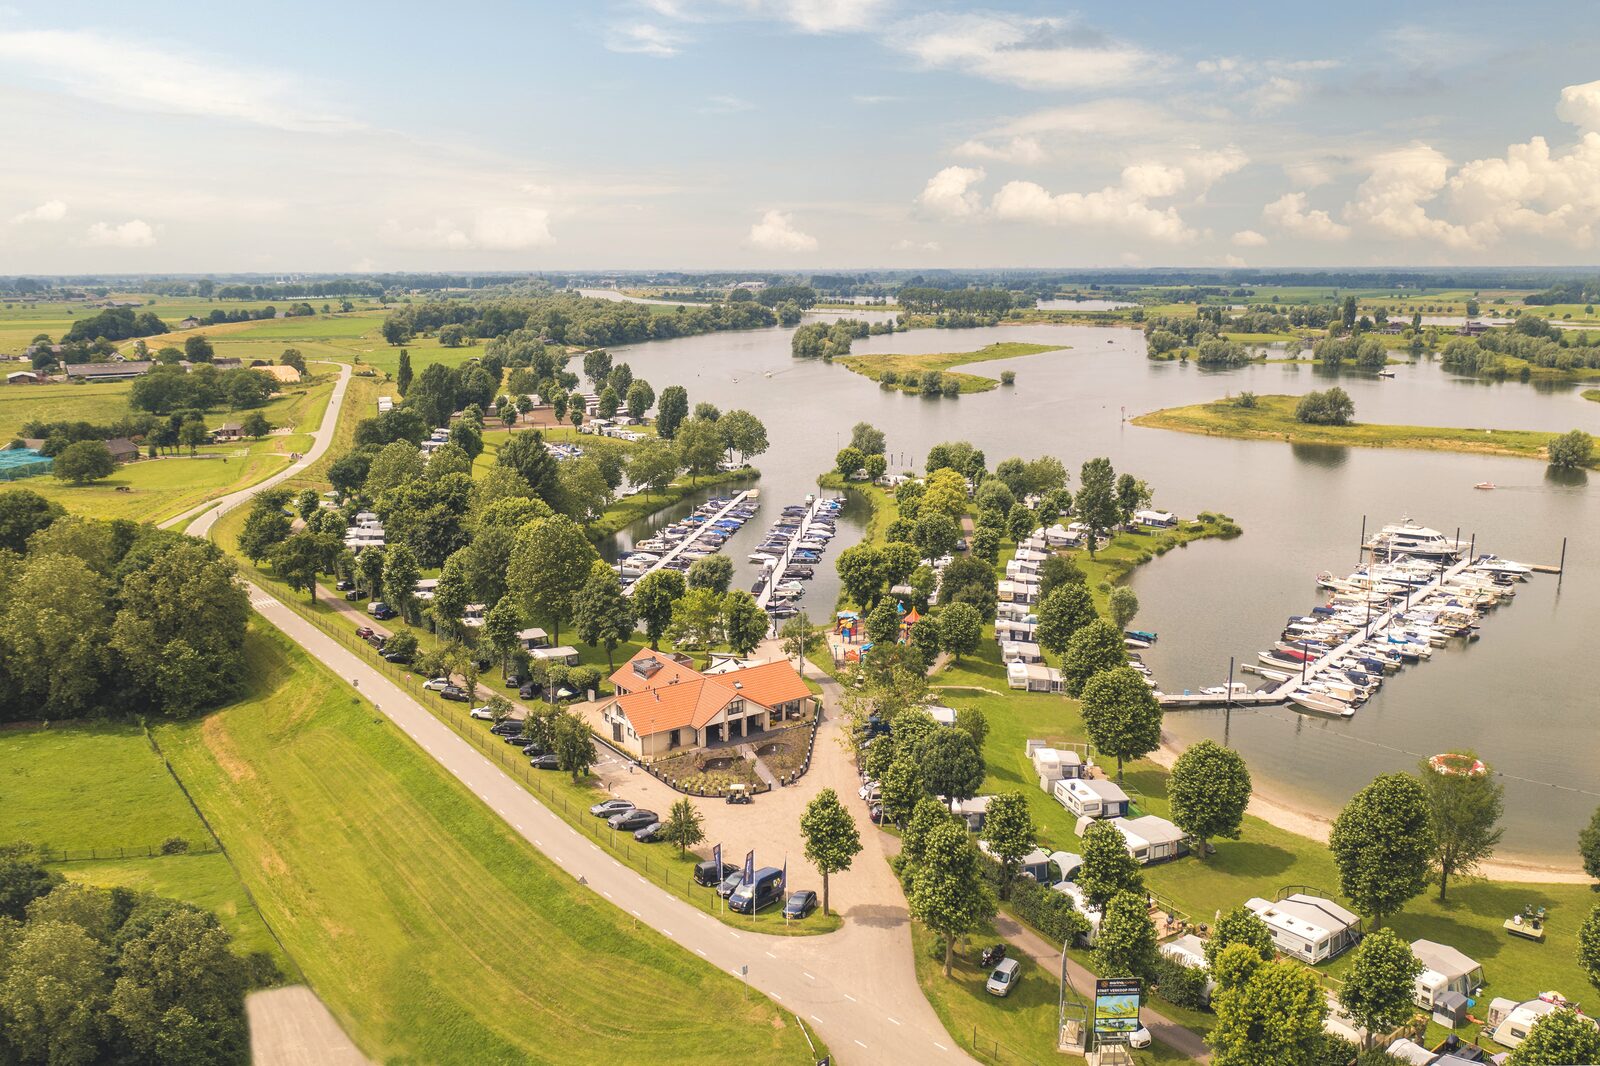 Take a look at our other park on the Nederrijn in Gelderland